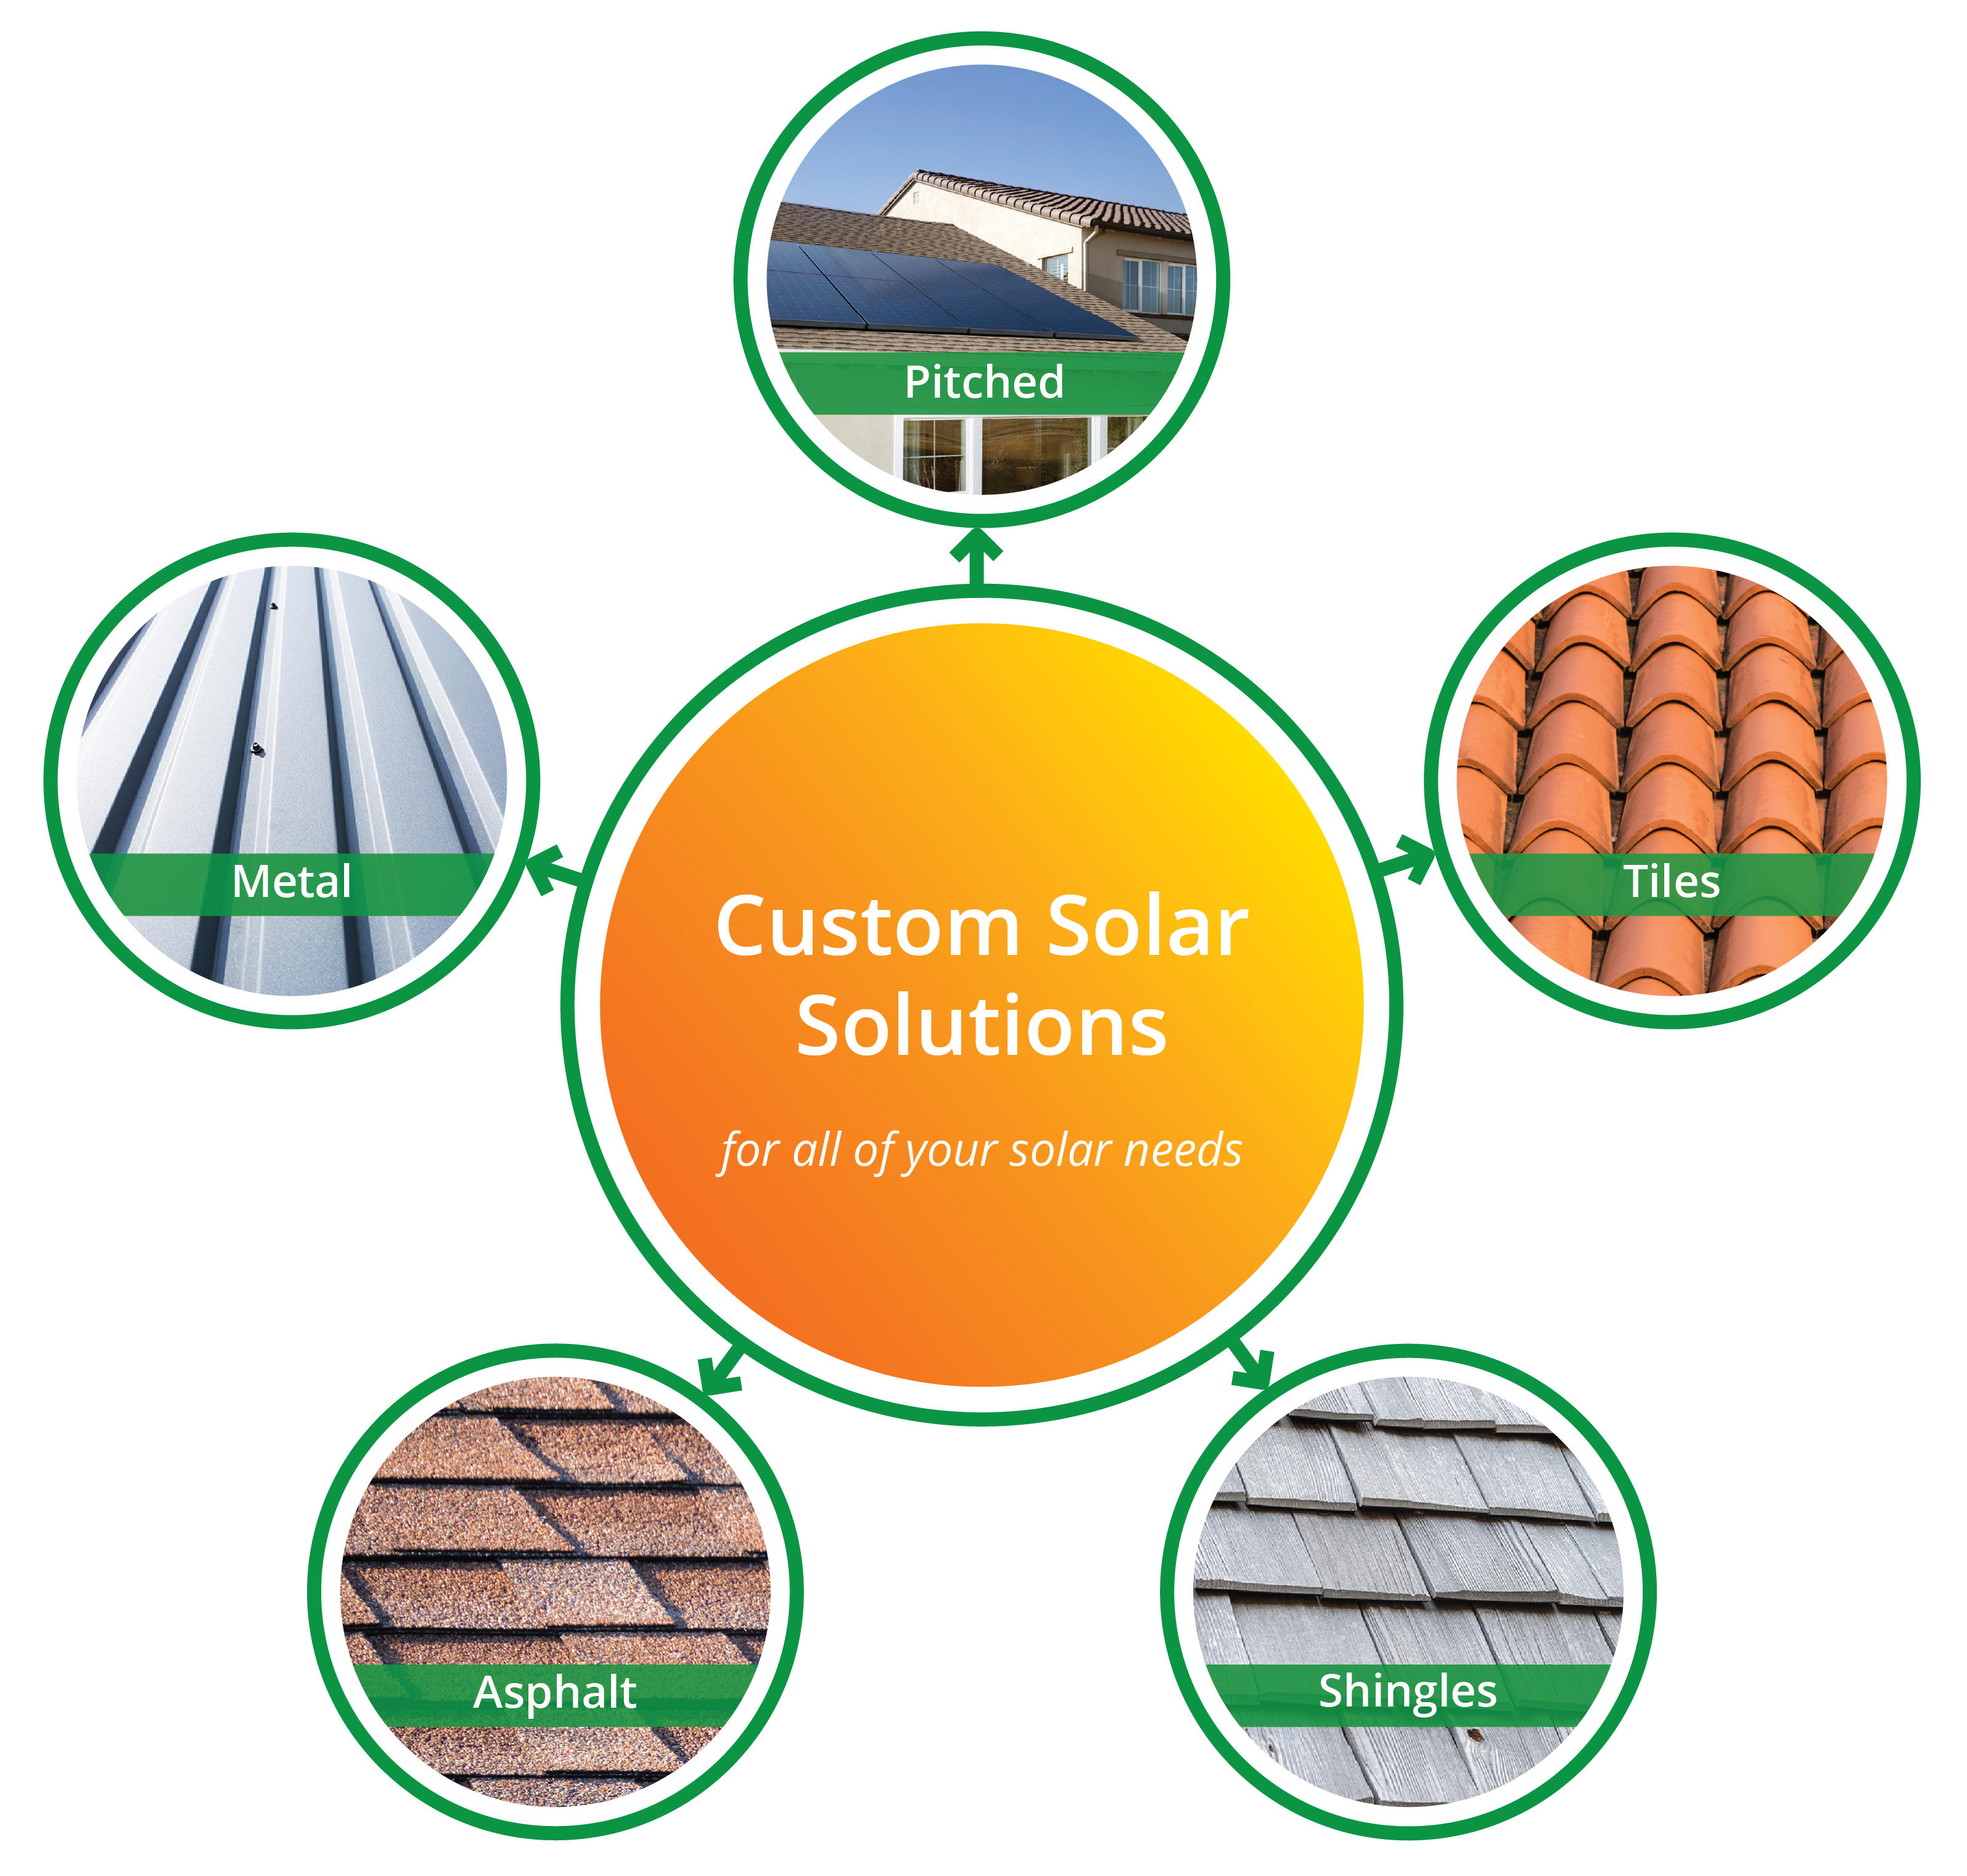 Custom solar solutions for pitched, canopy, flat, clay, asphalt, slate, and metal roofs